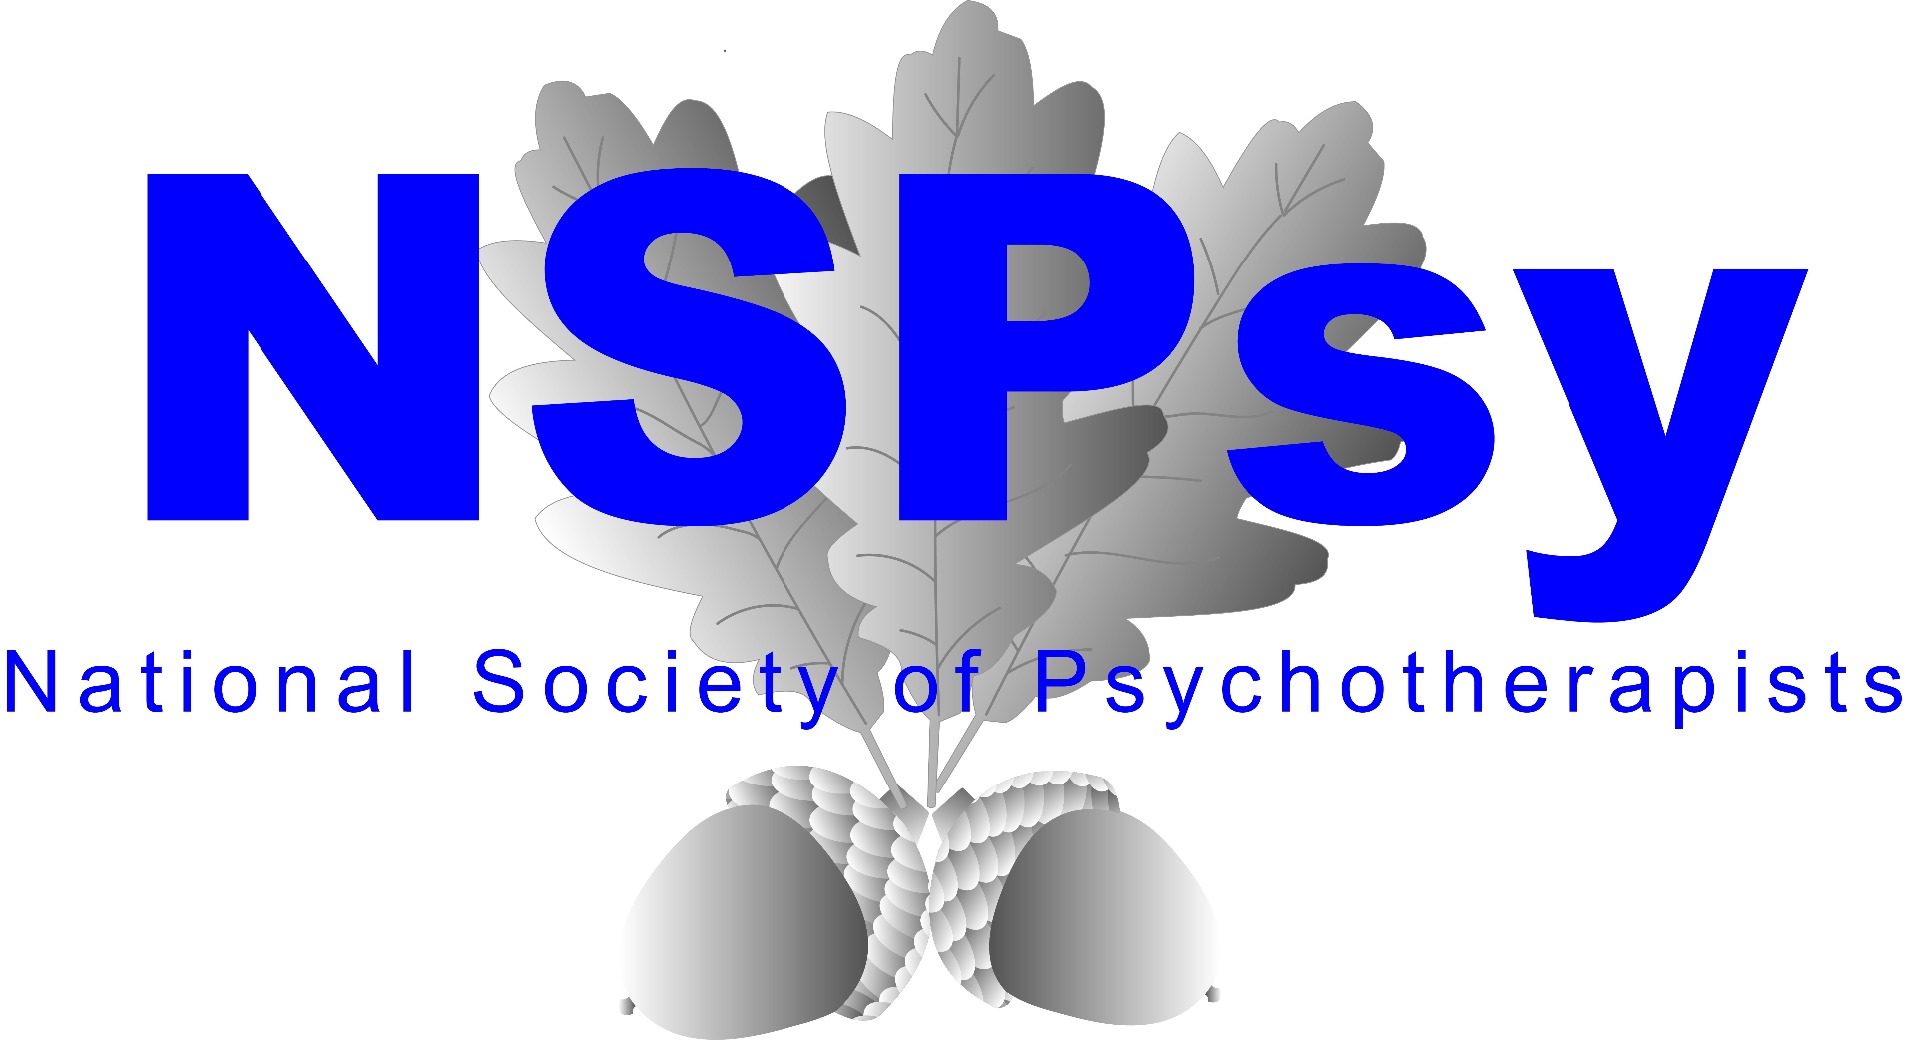 NSPsy a register for therapists